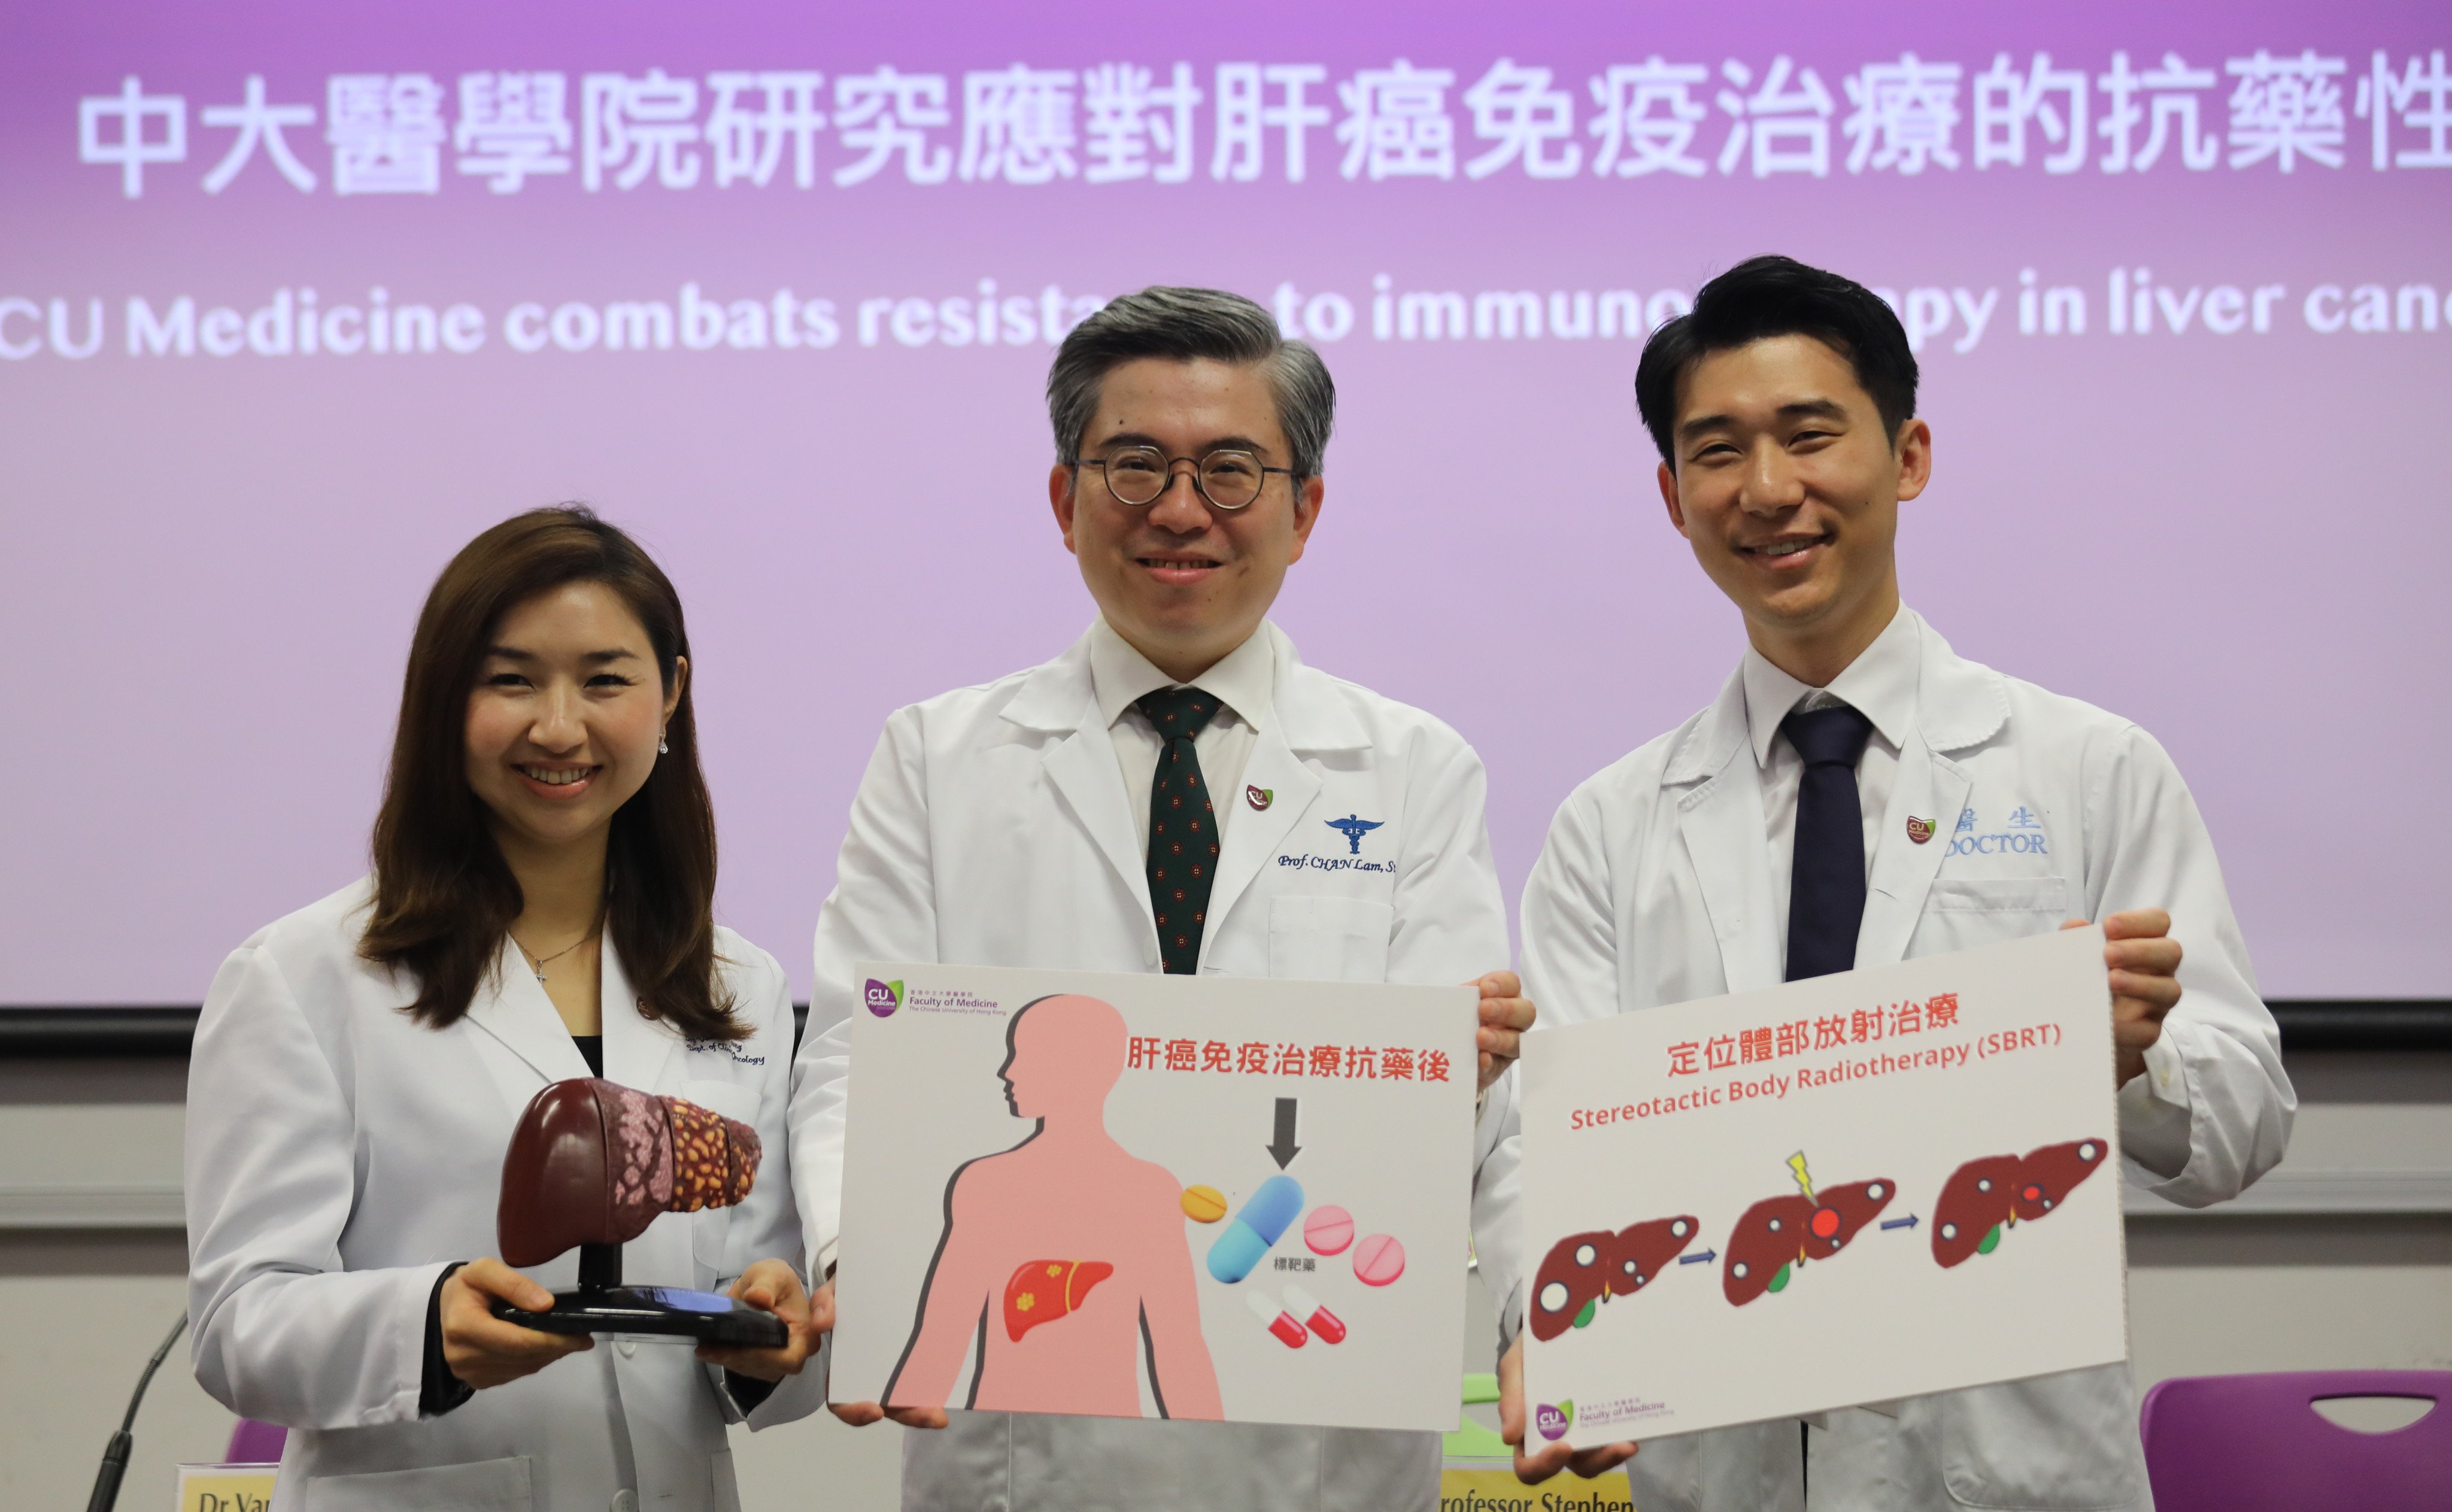 Medical experts from the Chinese University of Hong Kong have found that a targeted drug and radiotherapy could be used to prolong the lives of liver cancer patients. Photo: Xiaomei Chen